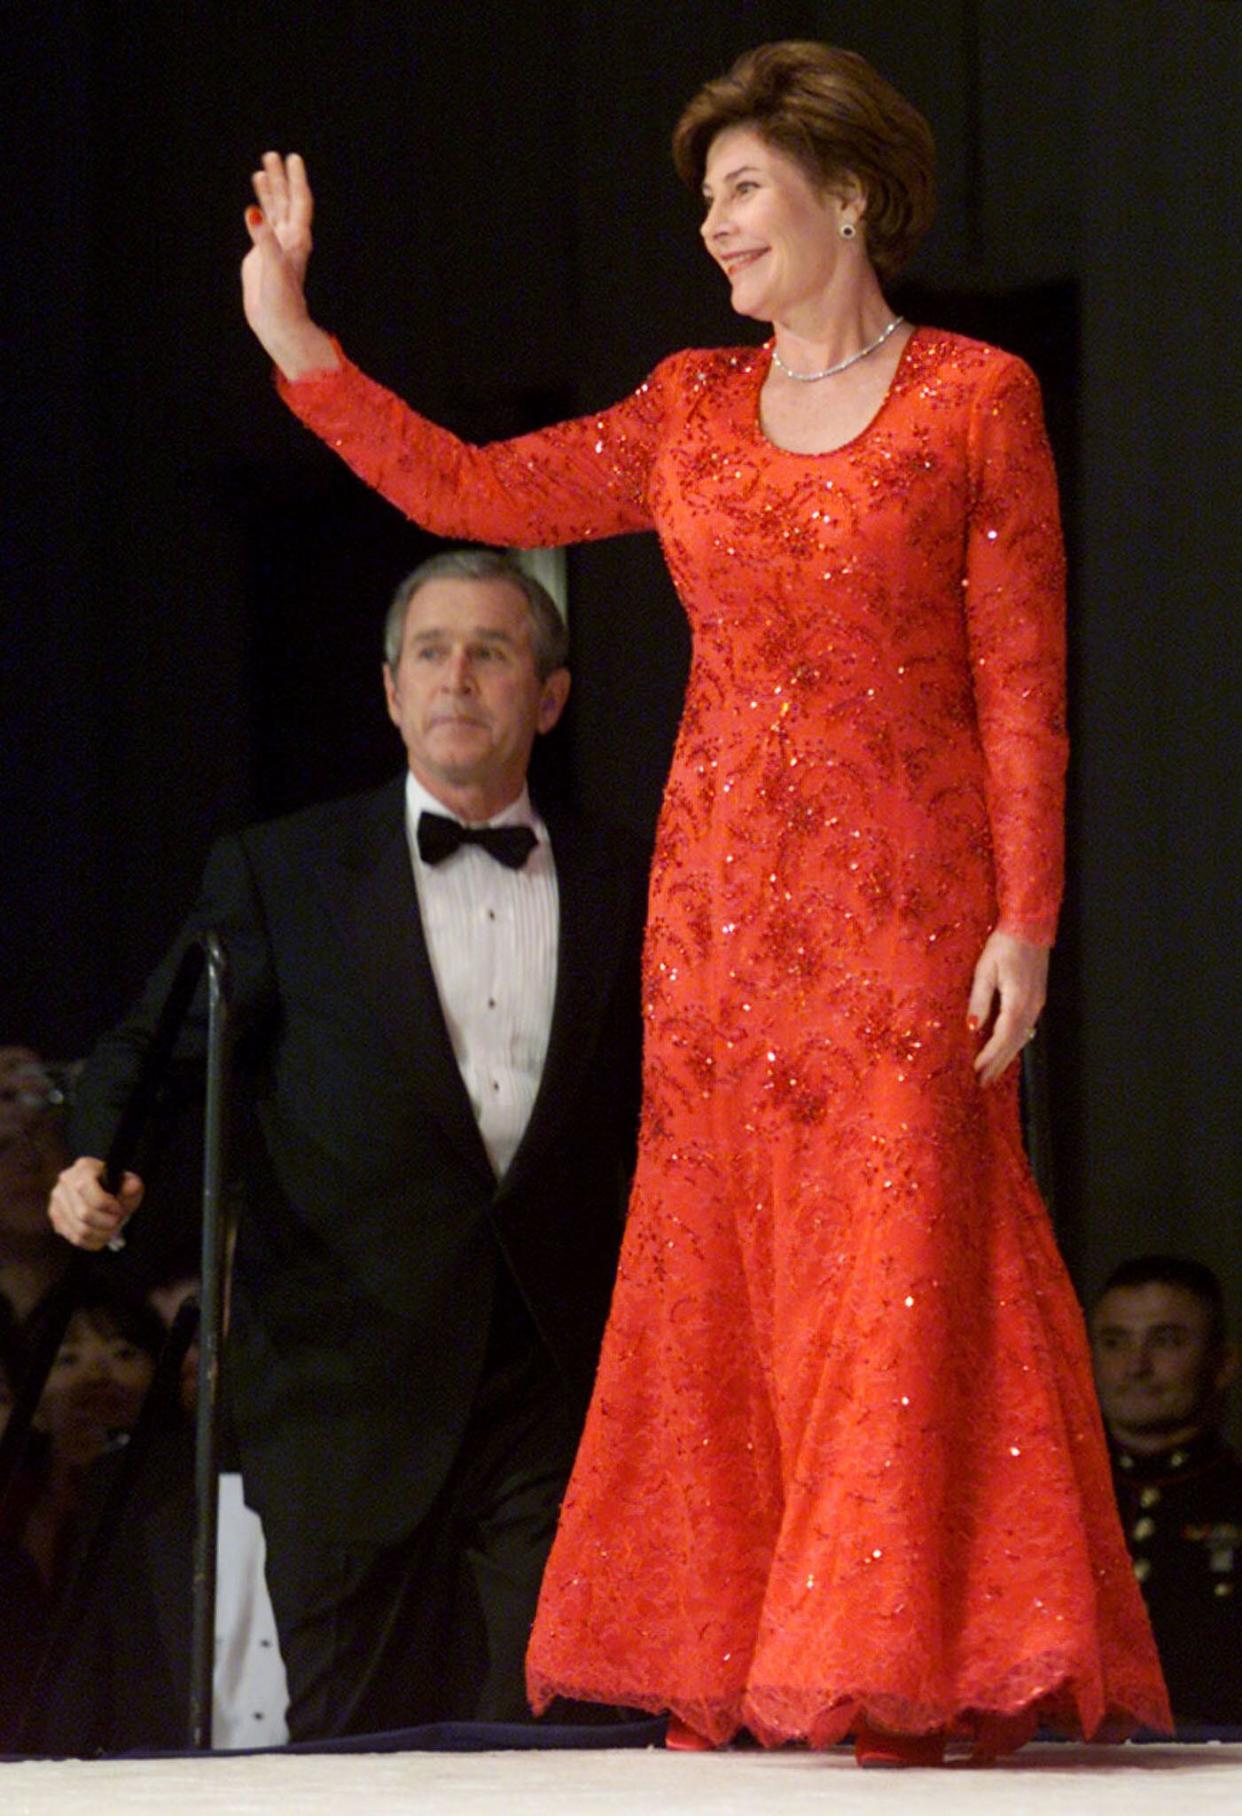 The new first lady acknowledges supporters at one of the 2001 inaugural balls.